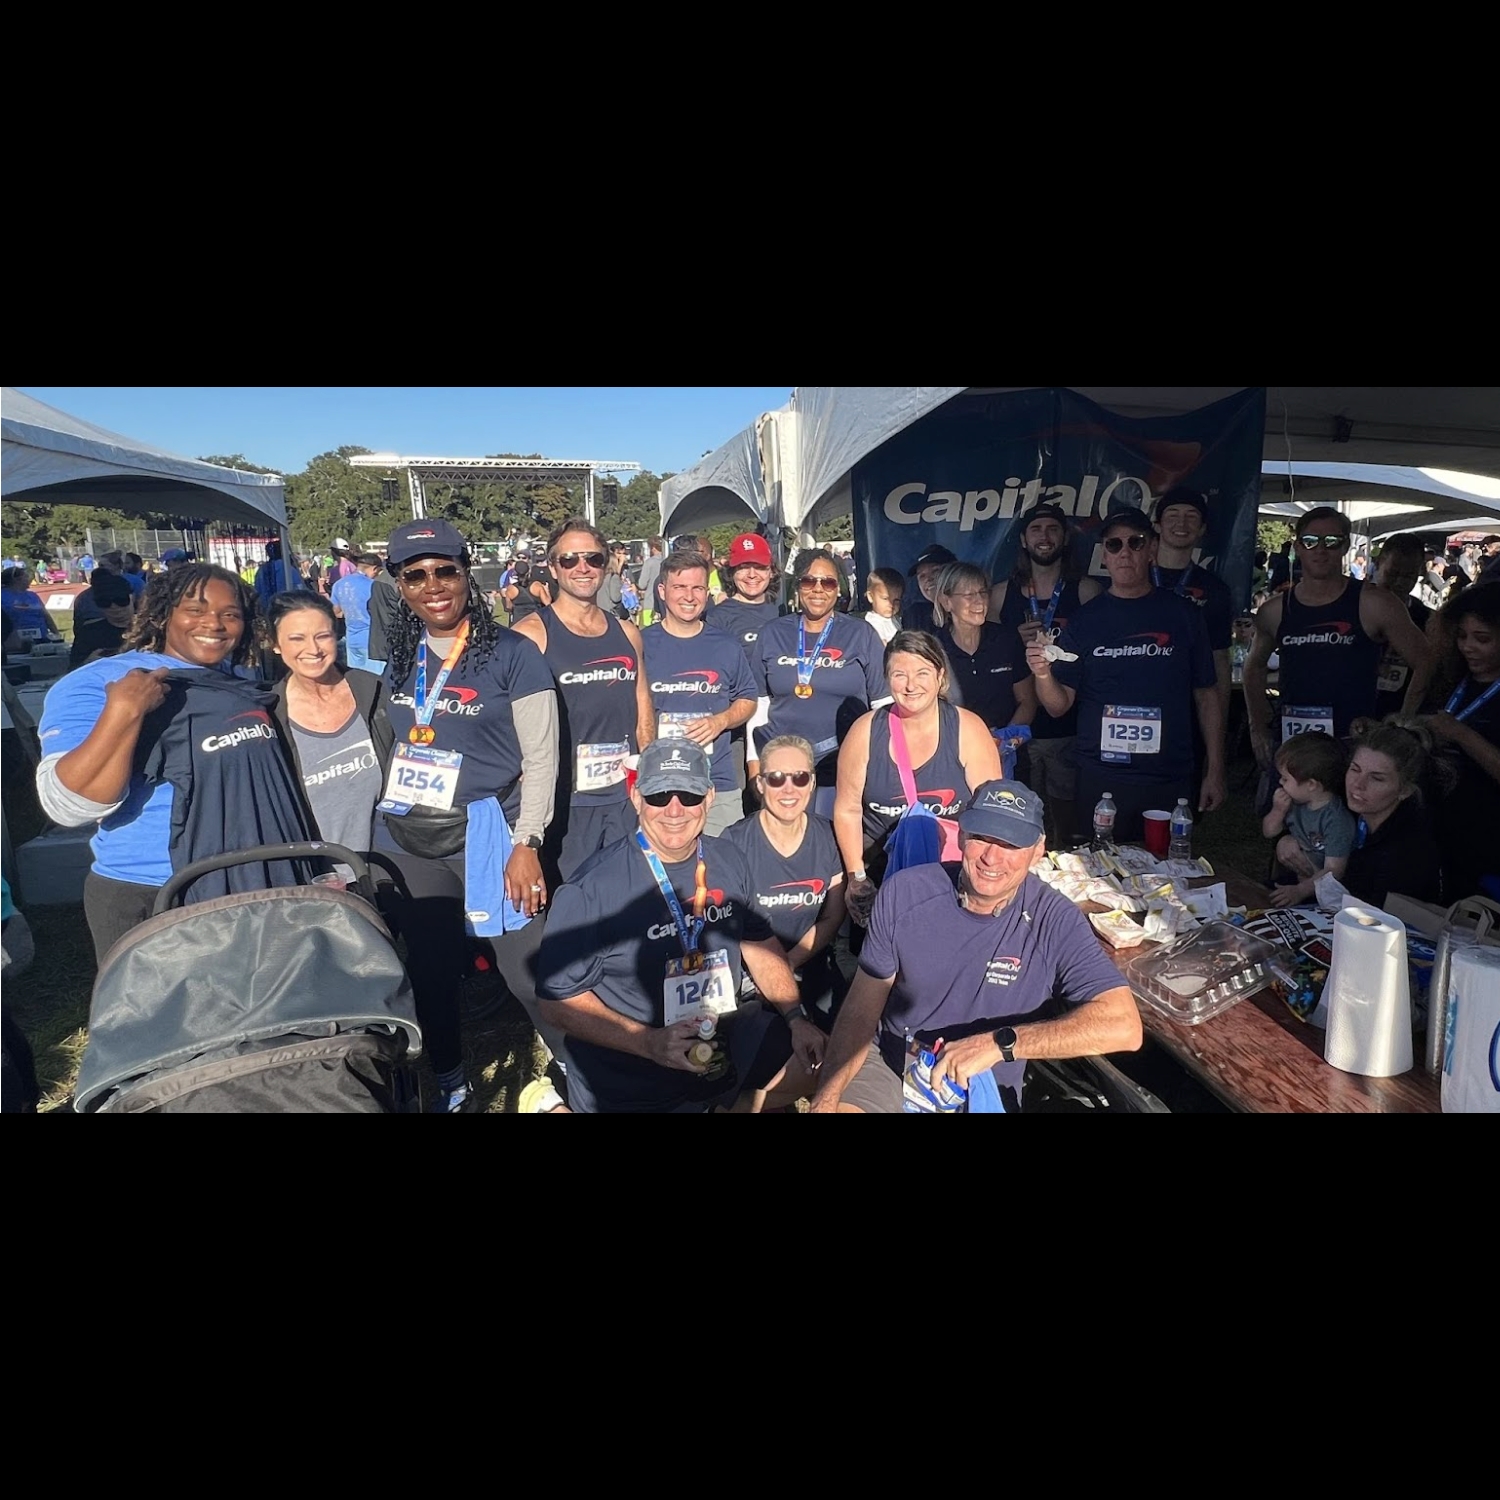 Over 30 associates spent Saturday morning competing on behalf of Capital One in the YMCA Corporate Classic in New Orleans. This 5K race brought together runners representing companies from across the greater New Orleans area, all with the goal of showing their support for the local YMCA.